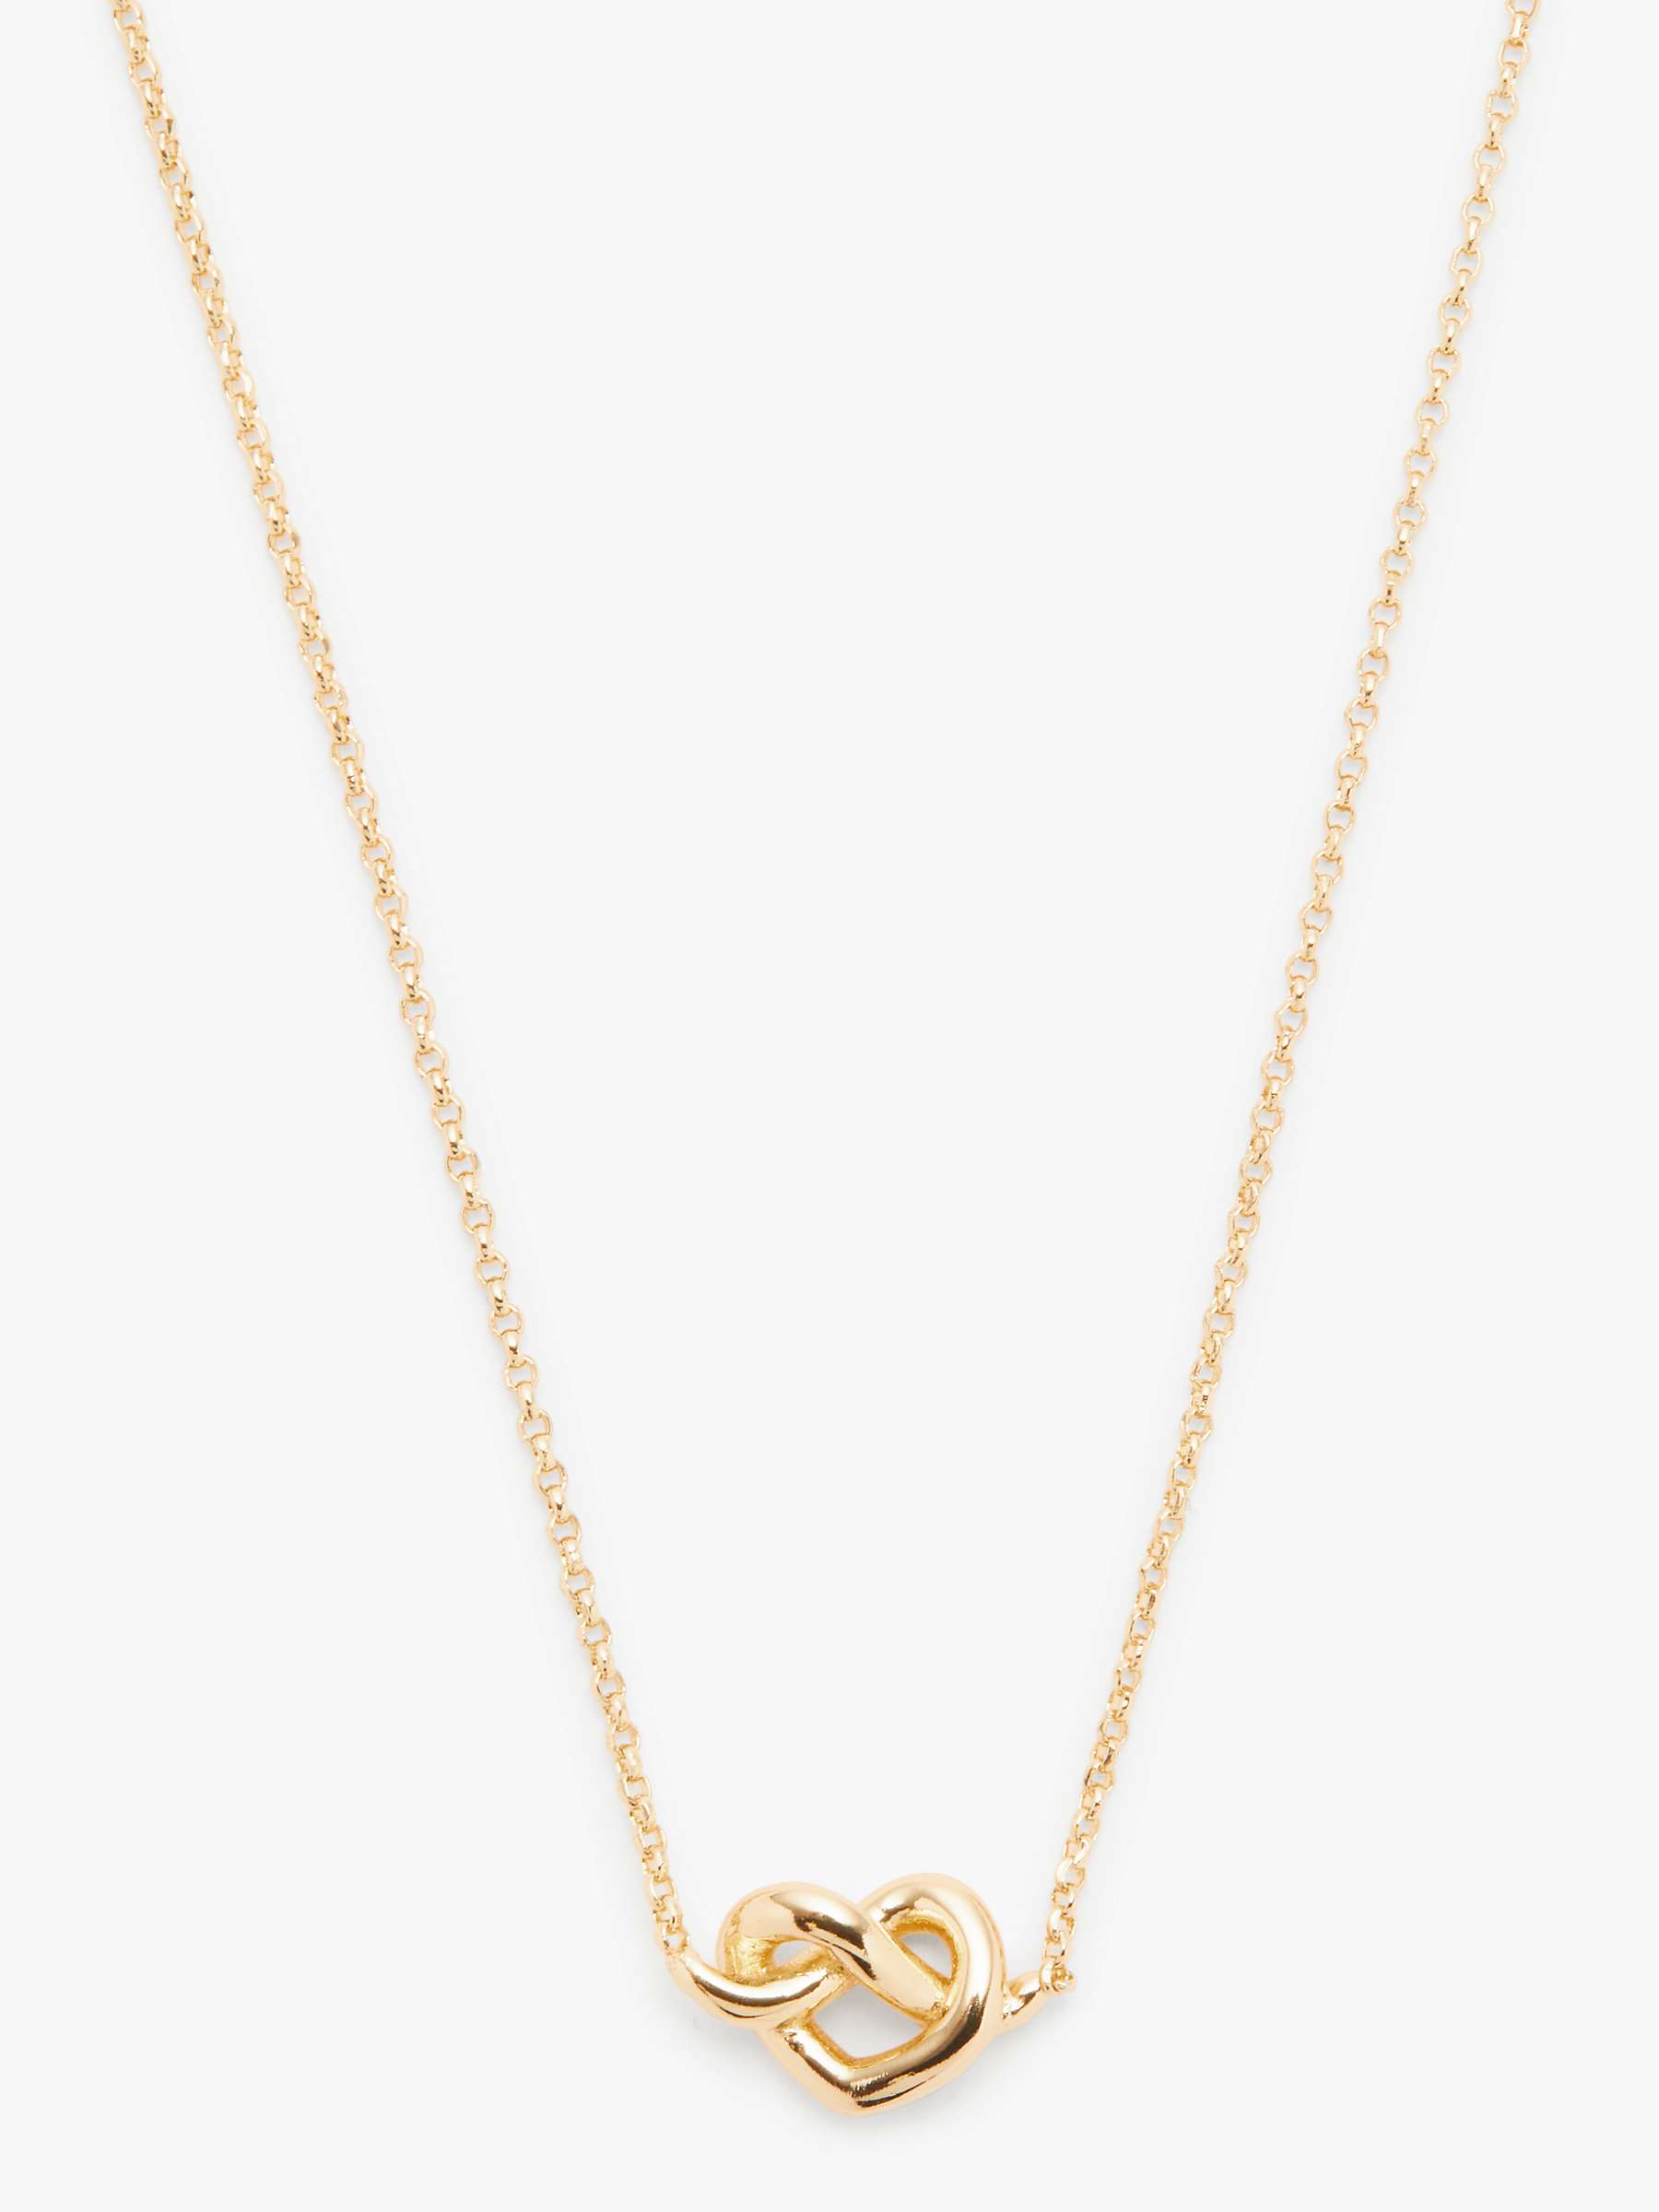 Buy kate spade new york Loves Me Knot Heart Pendant Necklace Online at johnlewis.com